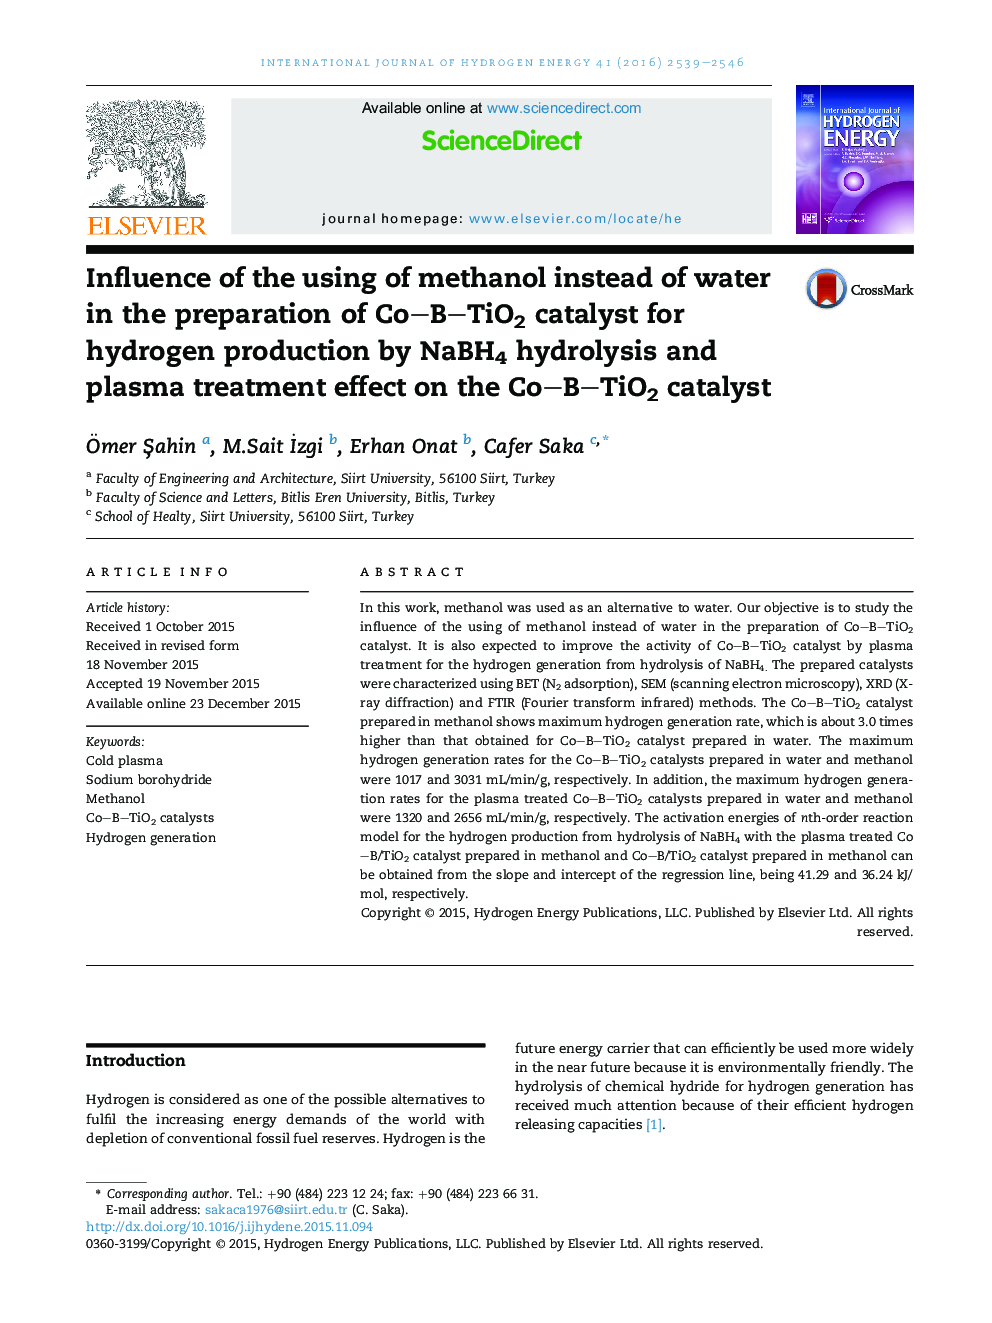 Influence of the using of methanol instead of water in the preparation of Co-B-TiO2 catalyst for hydrogen production by NaBH4 hydrolysis and plasma treatment effect on the Co-B-TiO2 catalyst